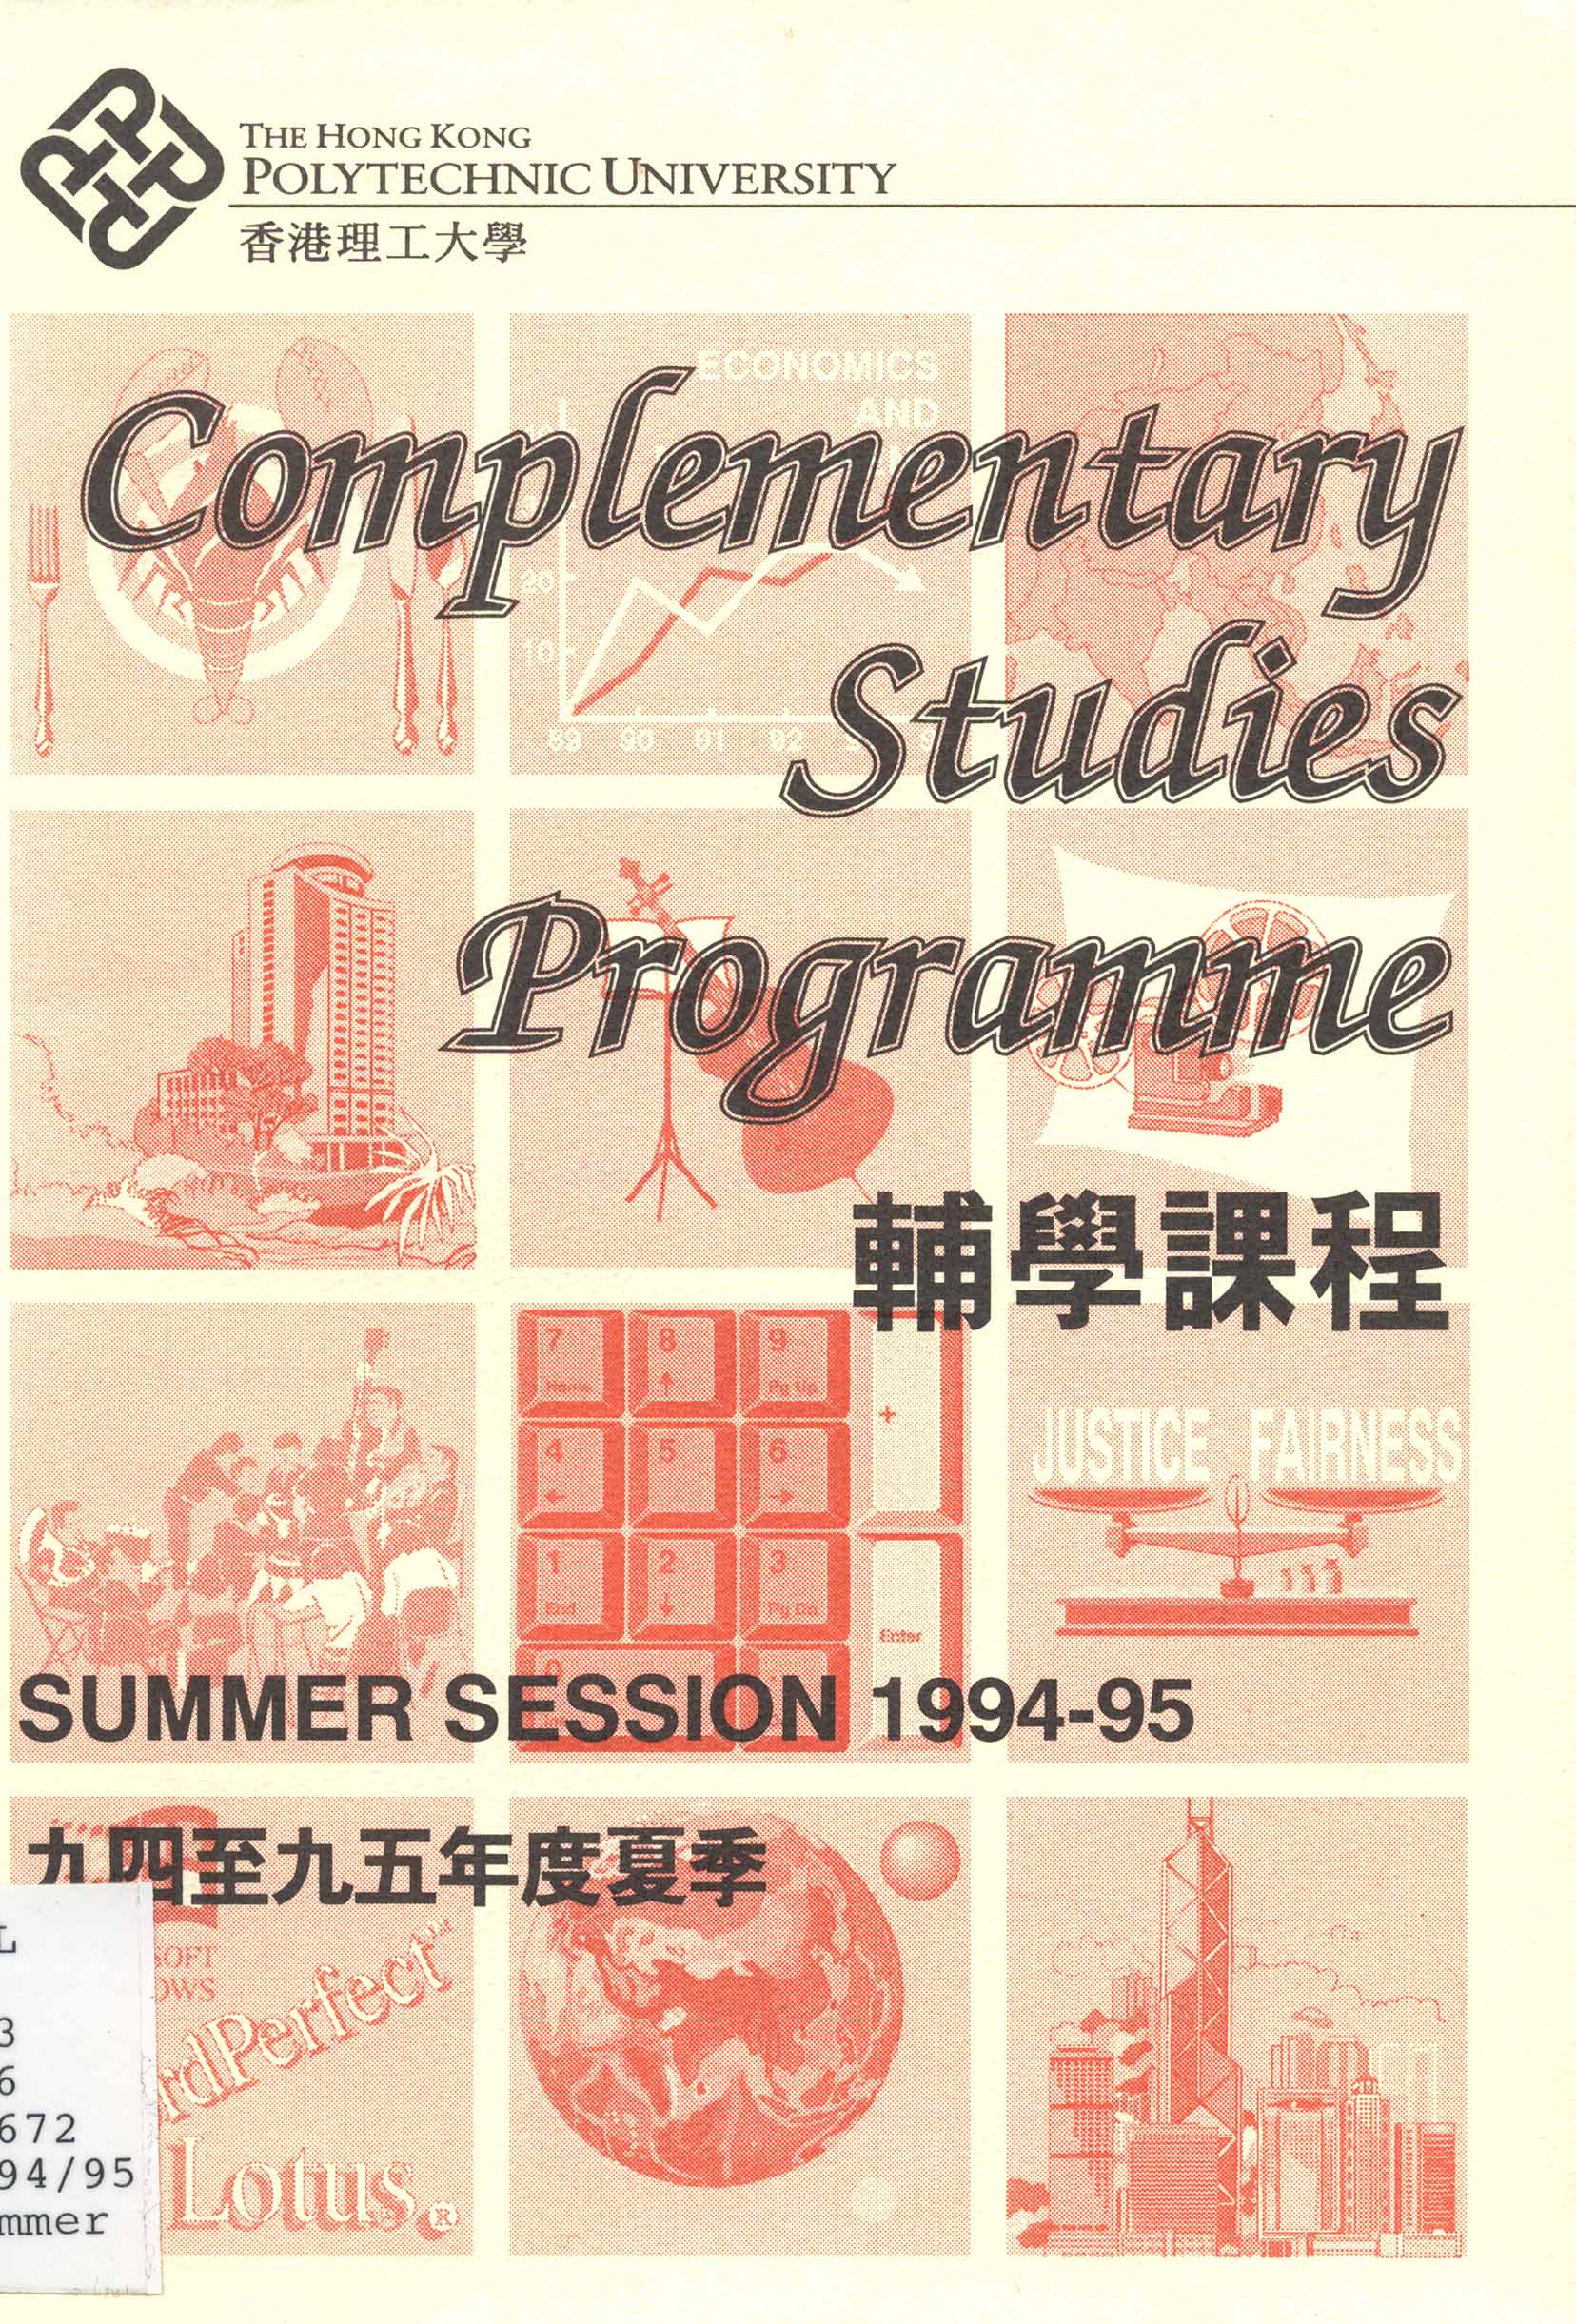 Complementary studies programme Summer session 1994-95